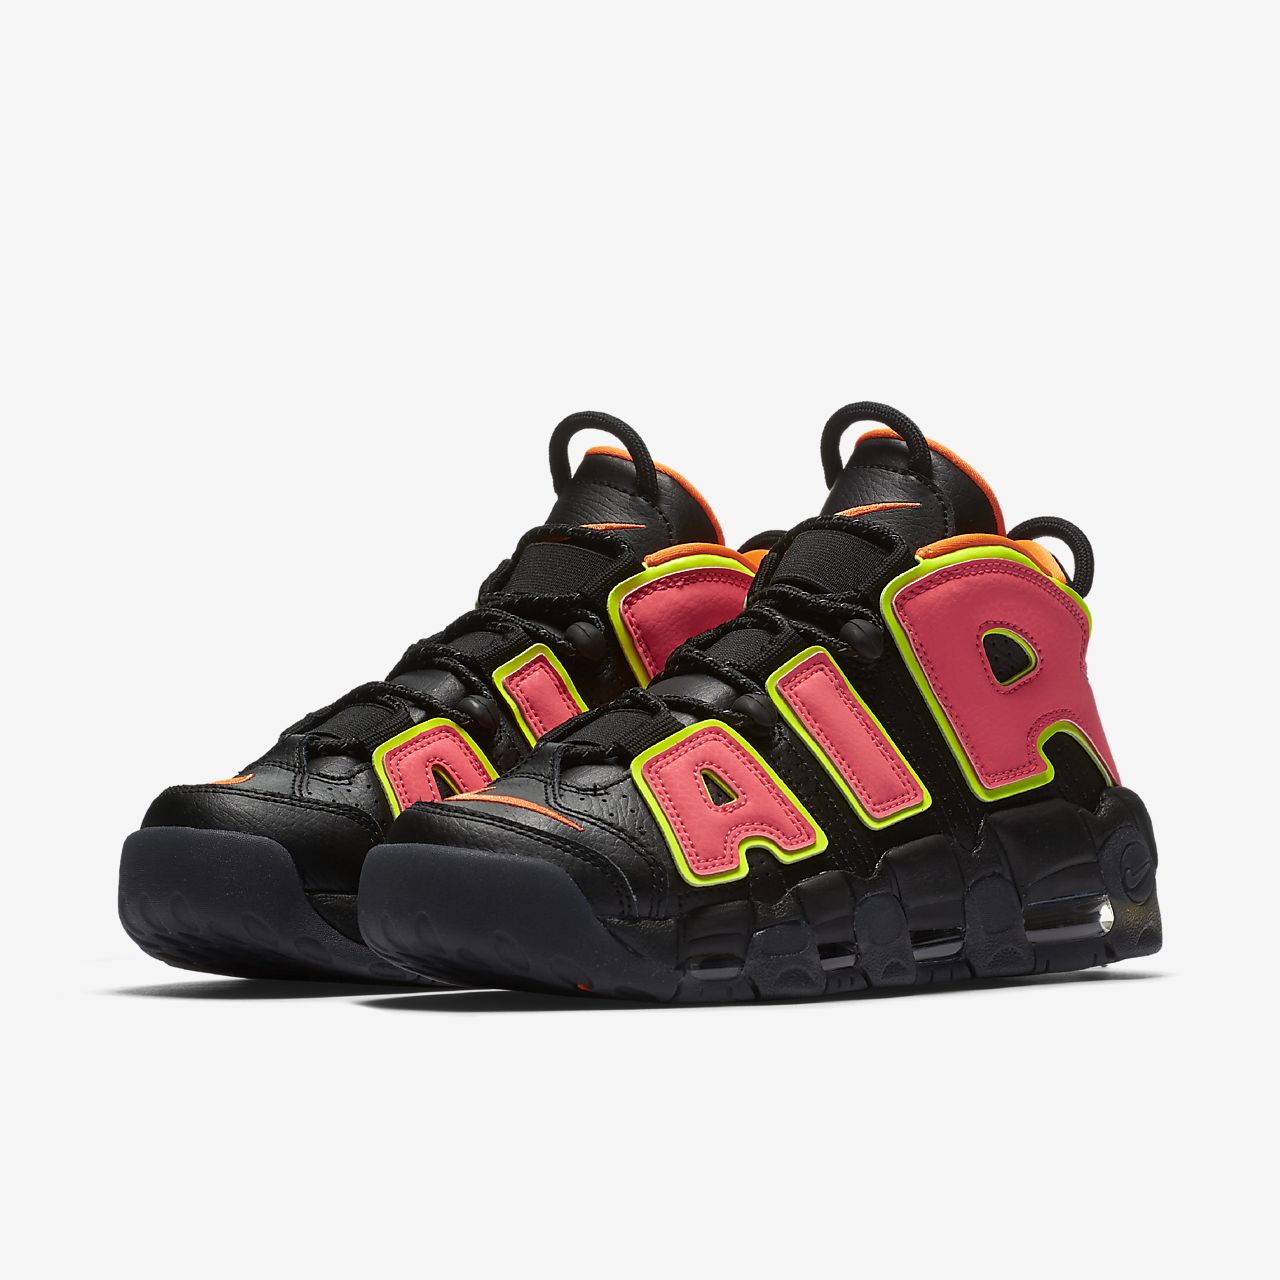 01-nike-womens-air-more-uptempo-hot-punch-917593-002